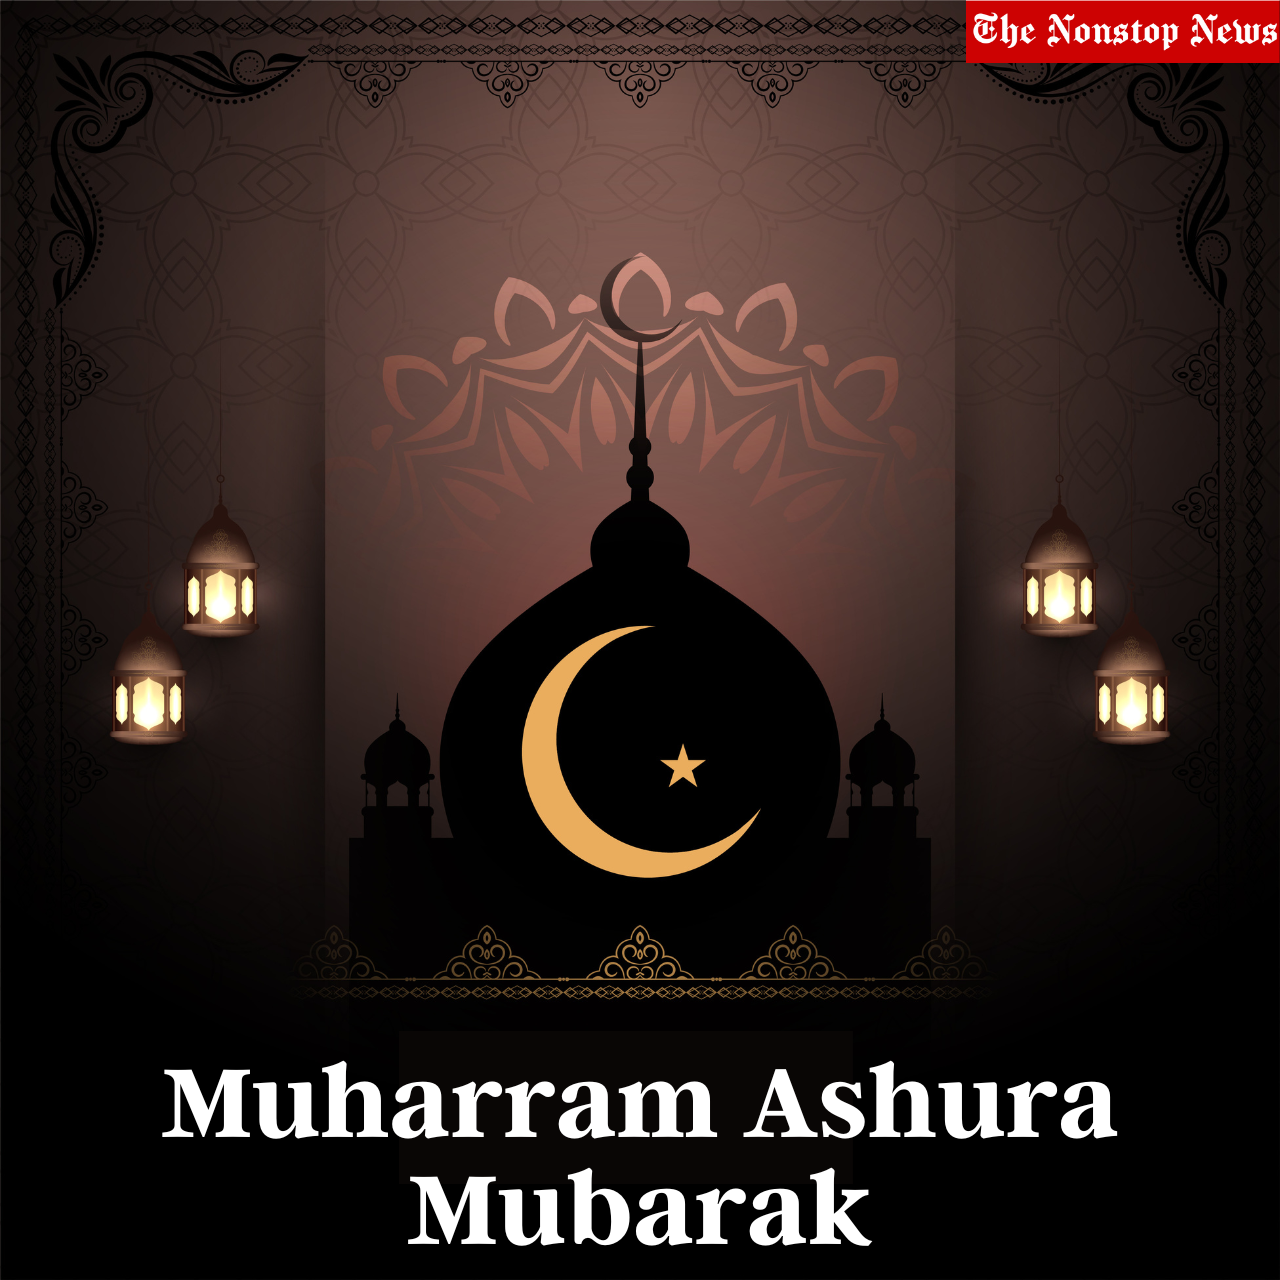 Muharram Ashura Mubarak 2022: Wishes, Images, Quotes, Messages, Dua, Greetings, To Share